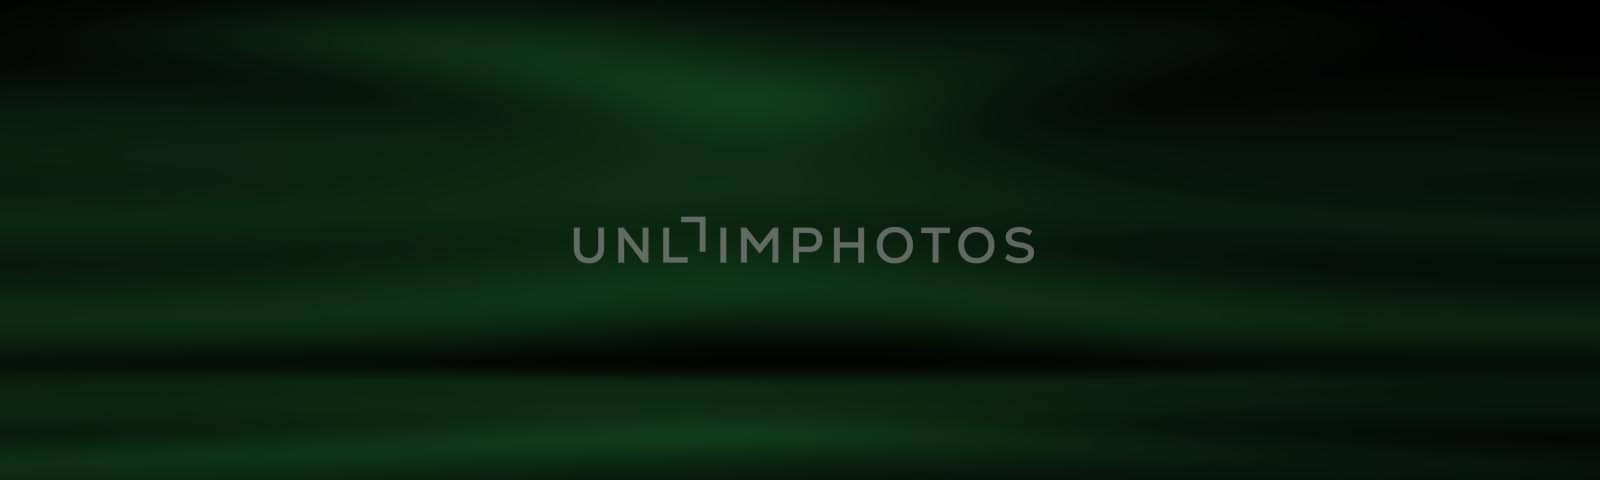 Abstract blur empty Green gradient Studio well use as background,website template,frame,business report.